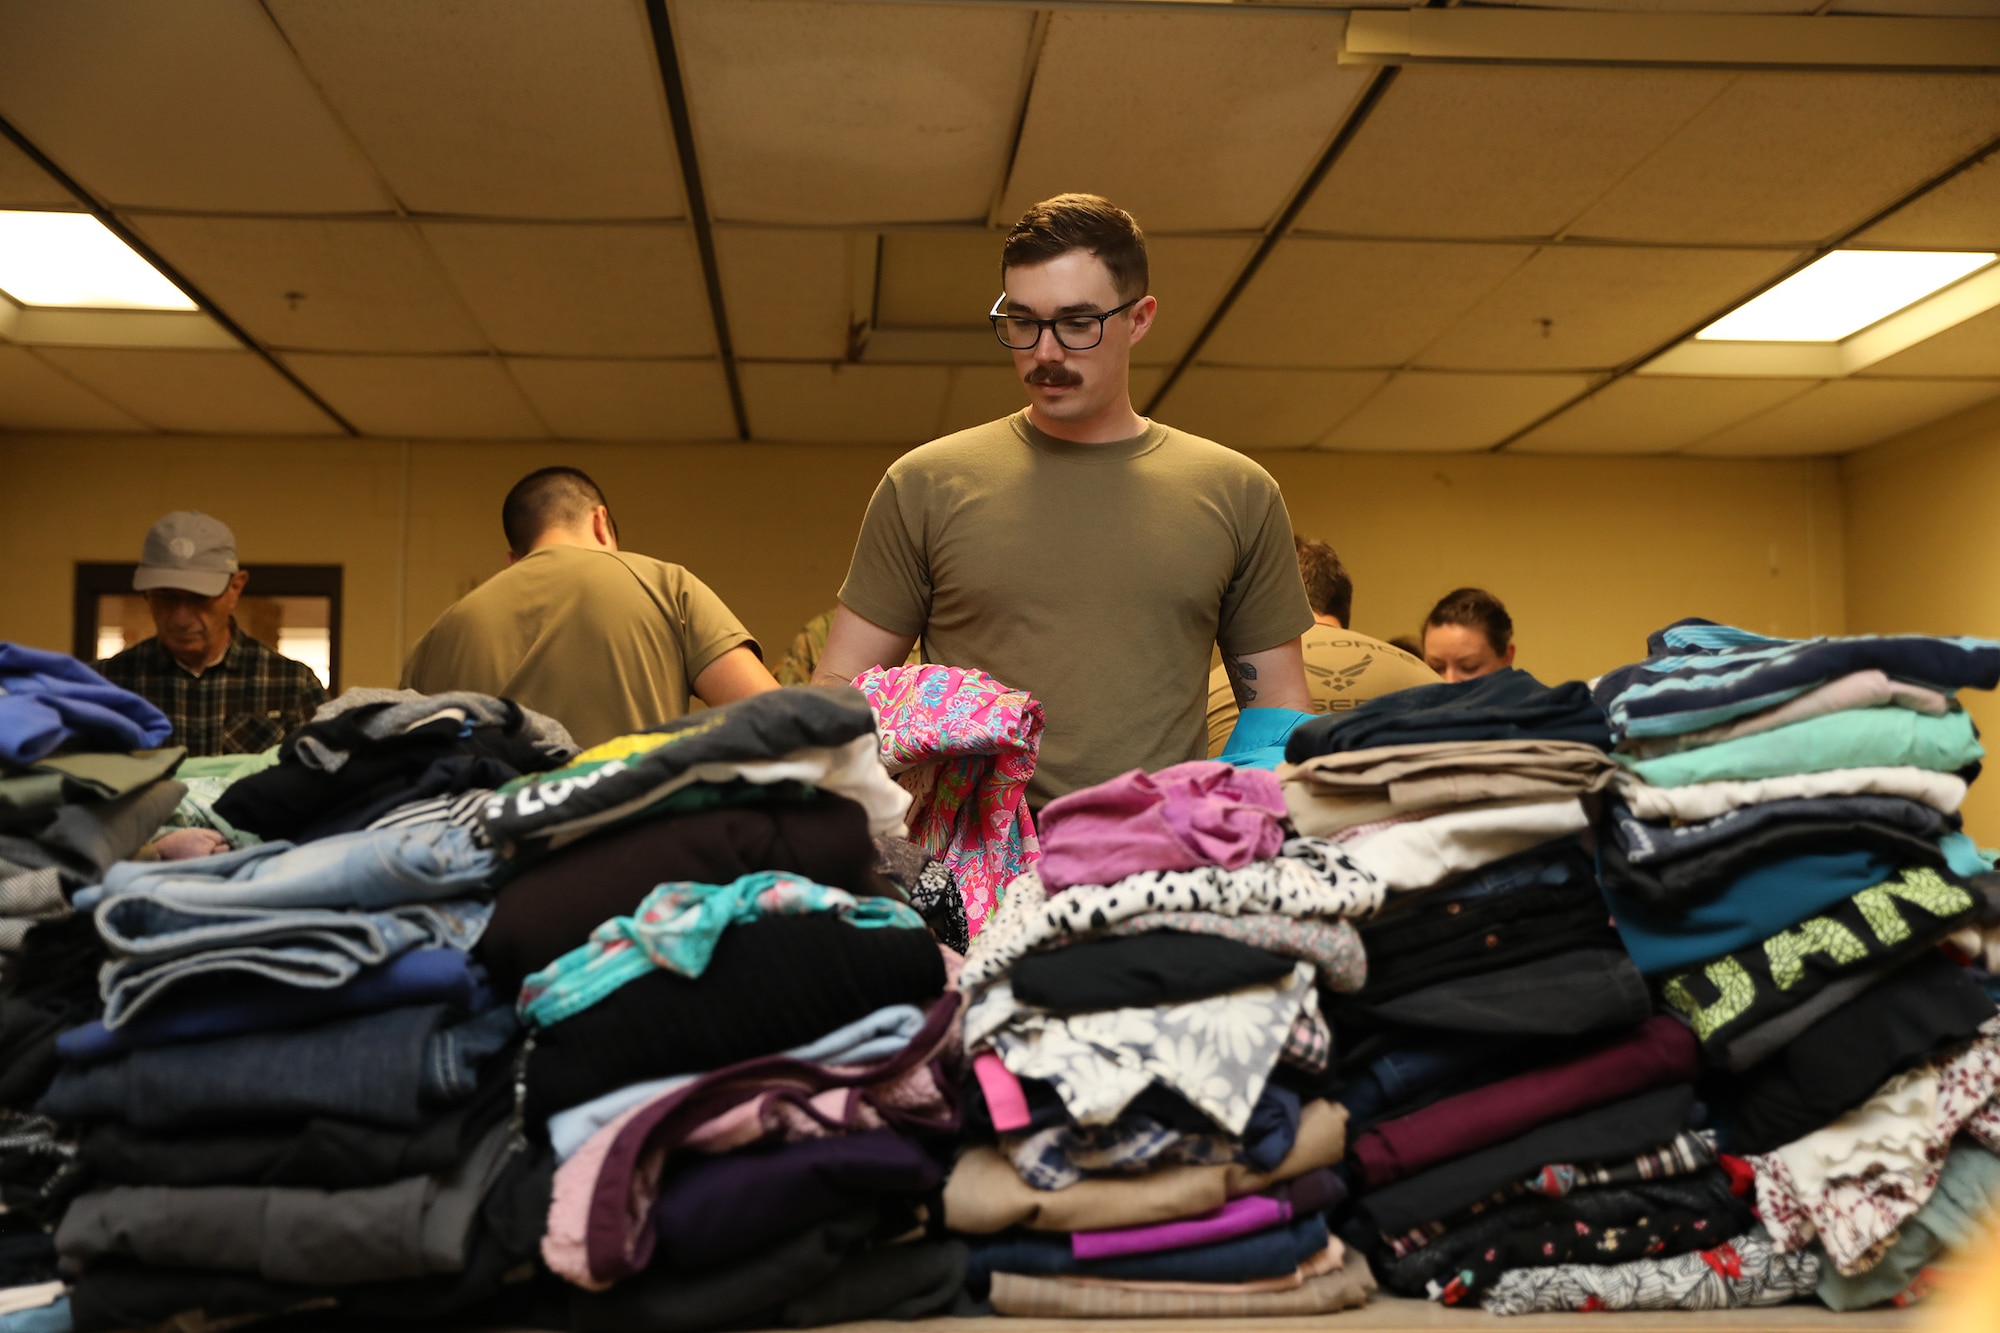 Staff Sgt. Carter Lee, 87th Aerial Port Squadron load planning craftsman, sorts and folds donated clothing items at the Bridges of Hope homeless shelter in Xenia, Ohio, March 10, 2024. (U.S. Air Force photo/Senior Airman Angela Jackson)